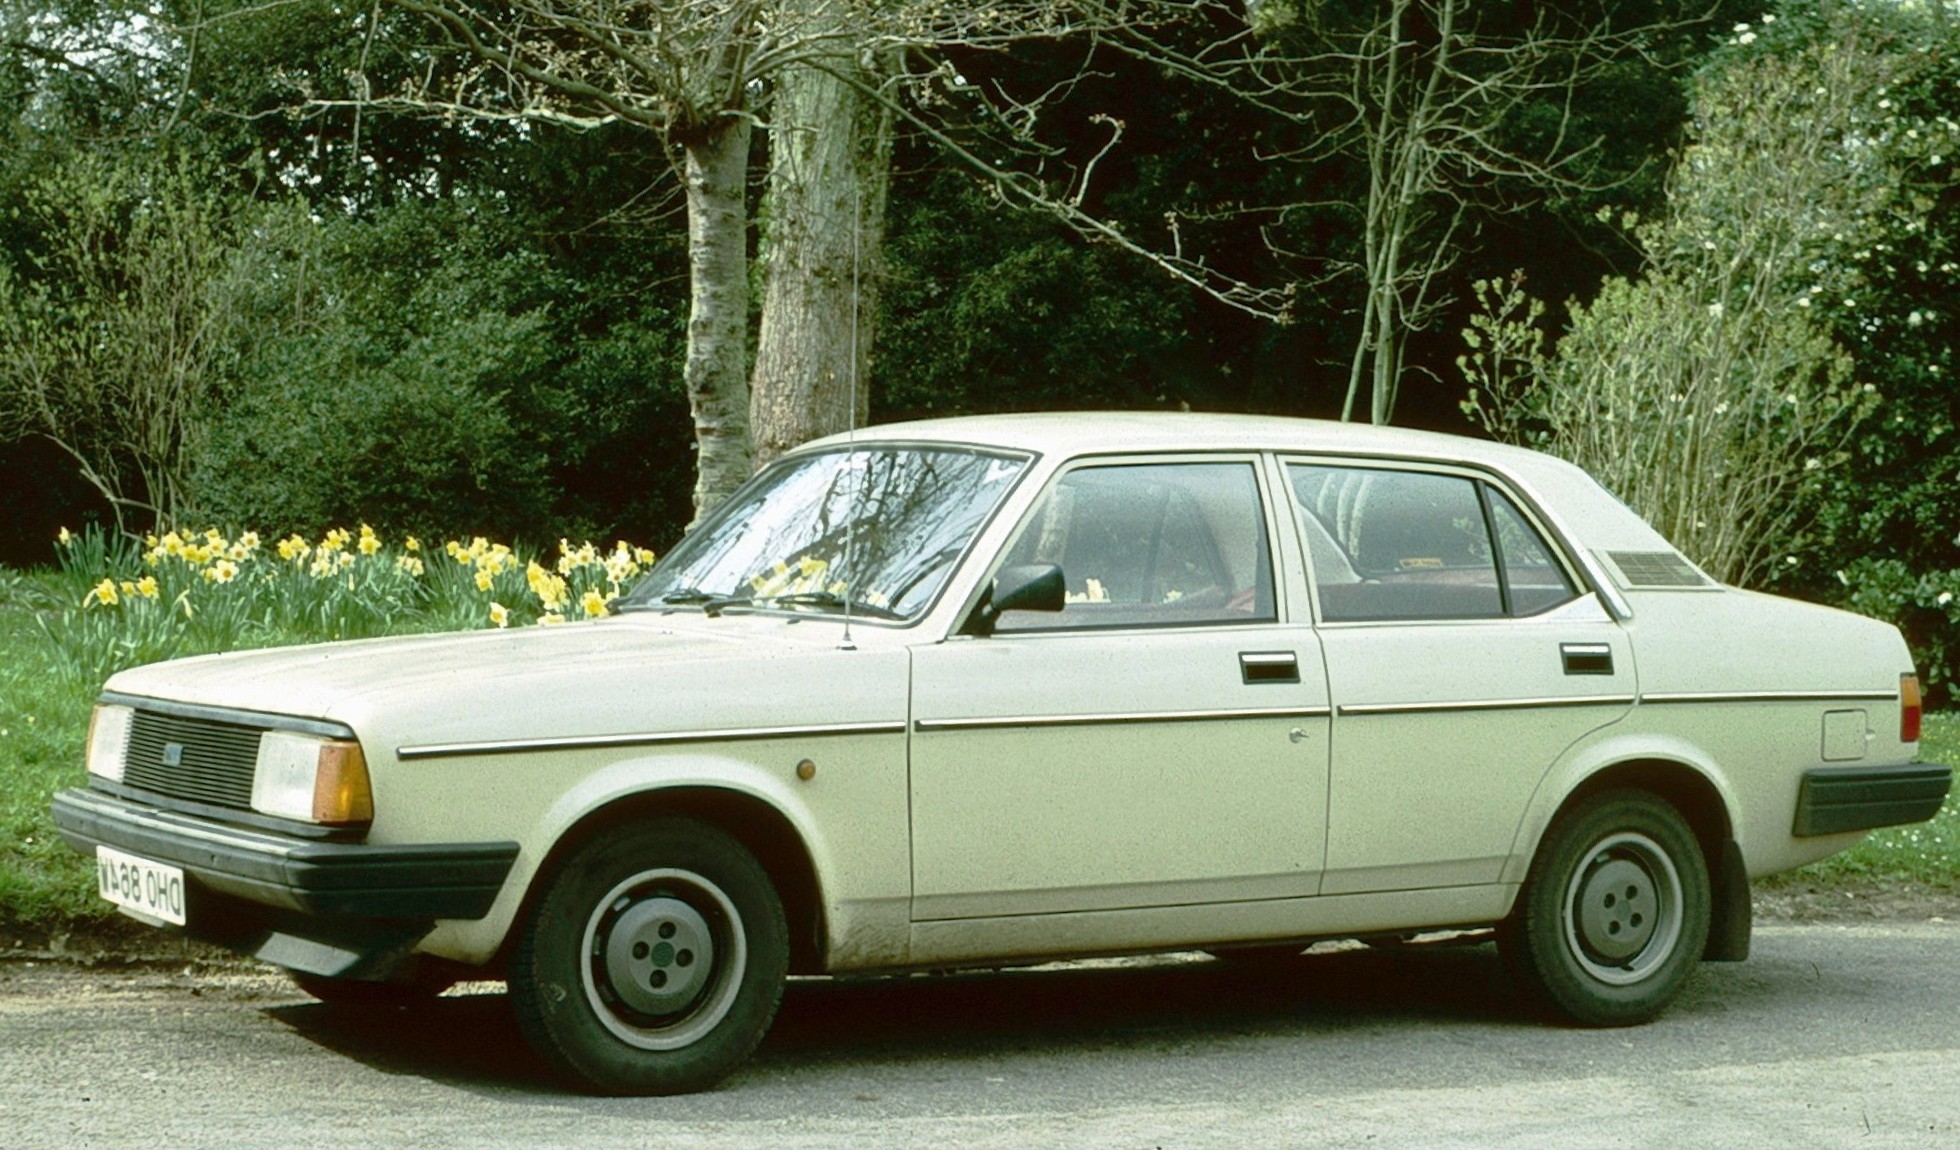 File:Morris Ital with Spring flowers.jpg - Wikimedia Commons